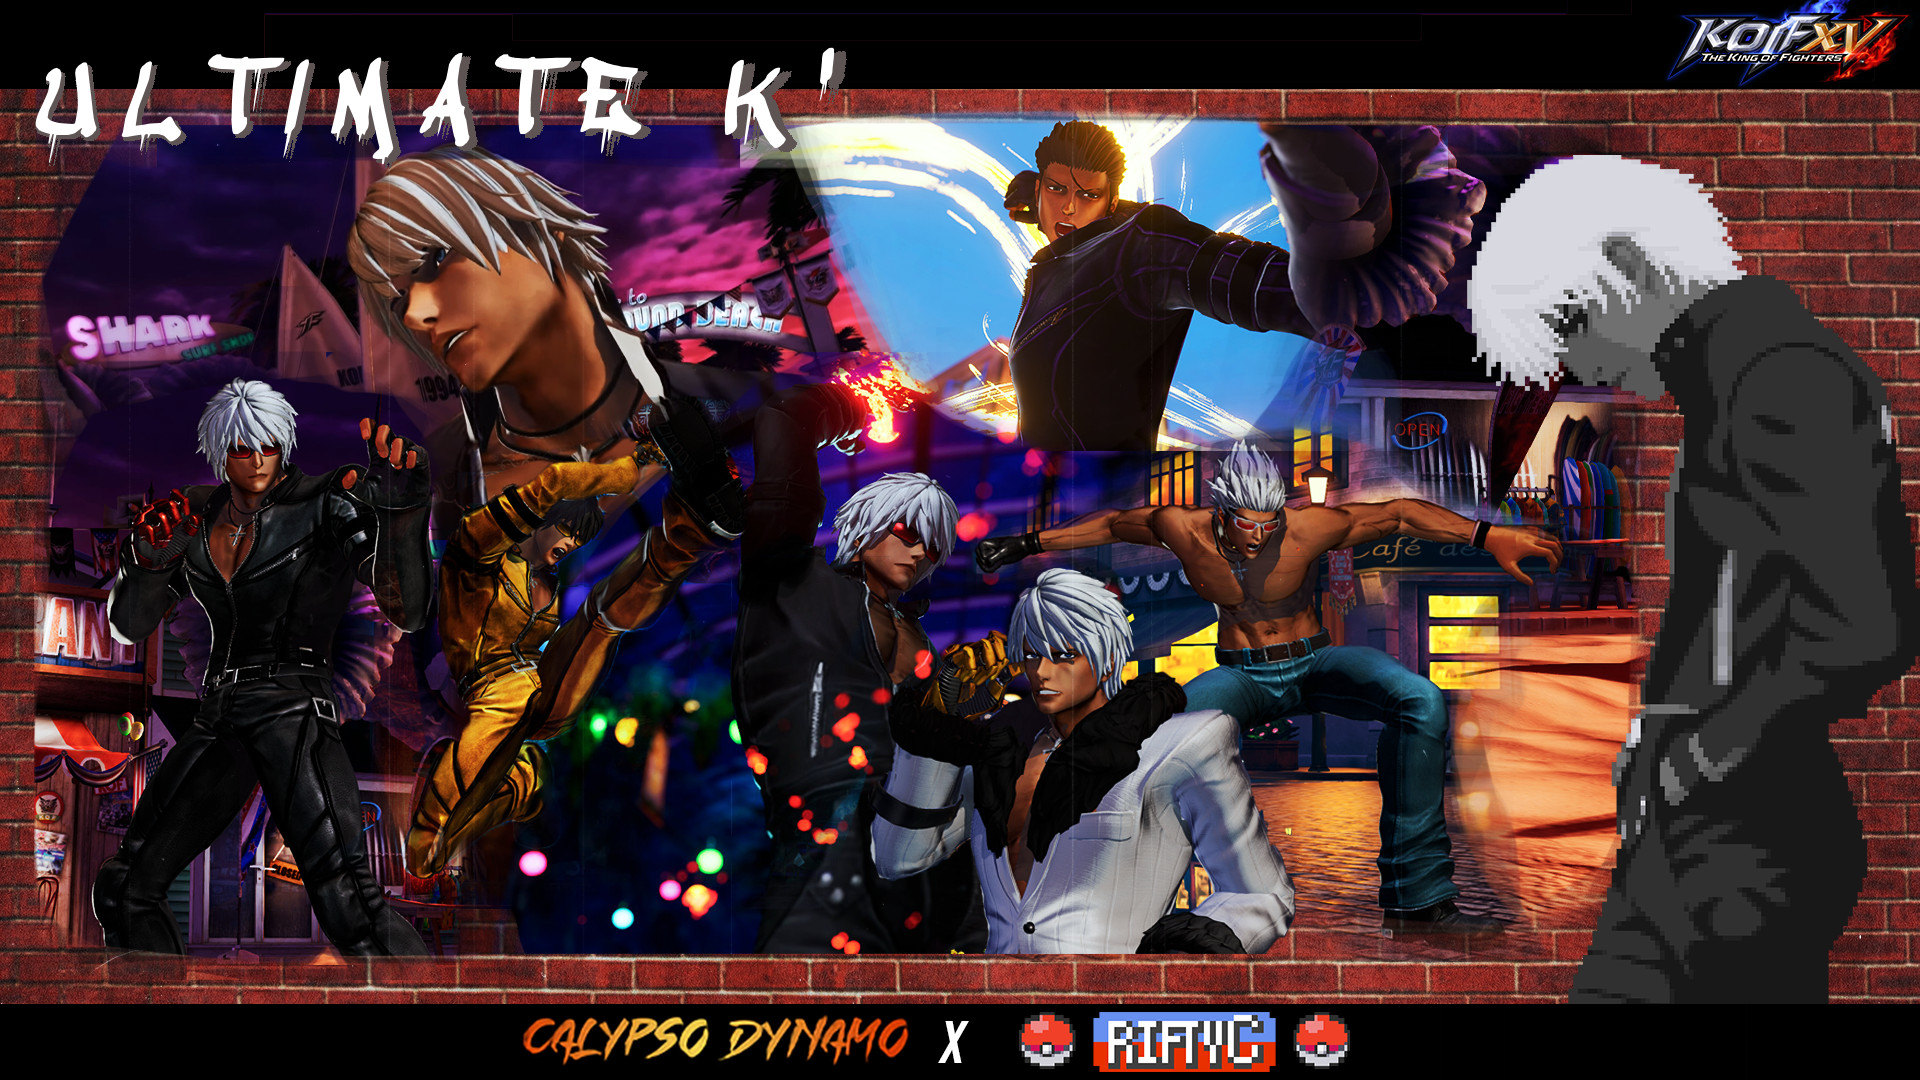 Fan-Favorite K' Lights up the Stage in The King of Fighters XV